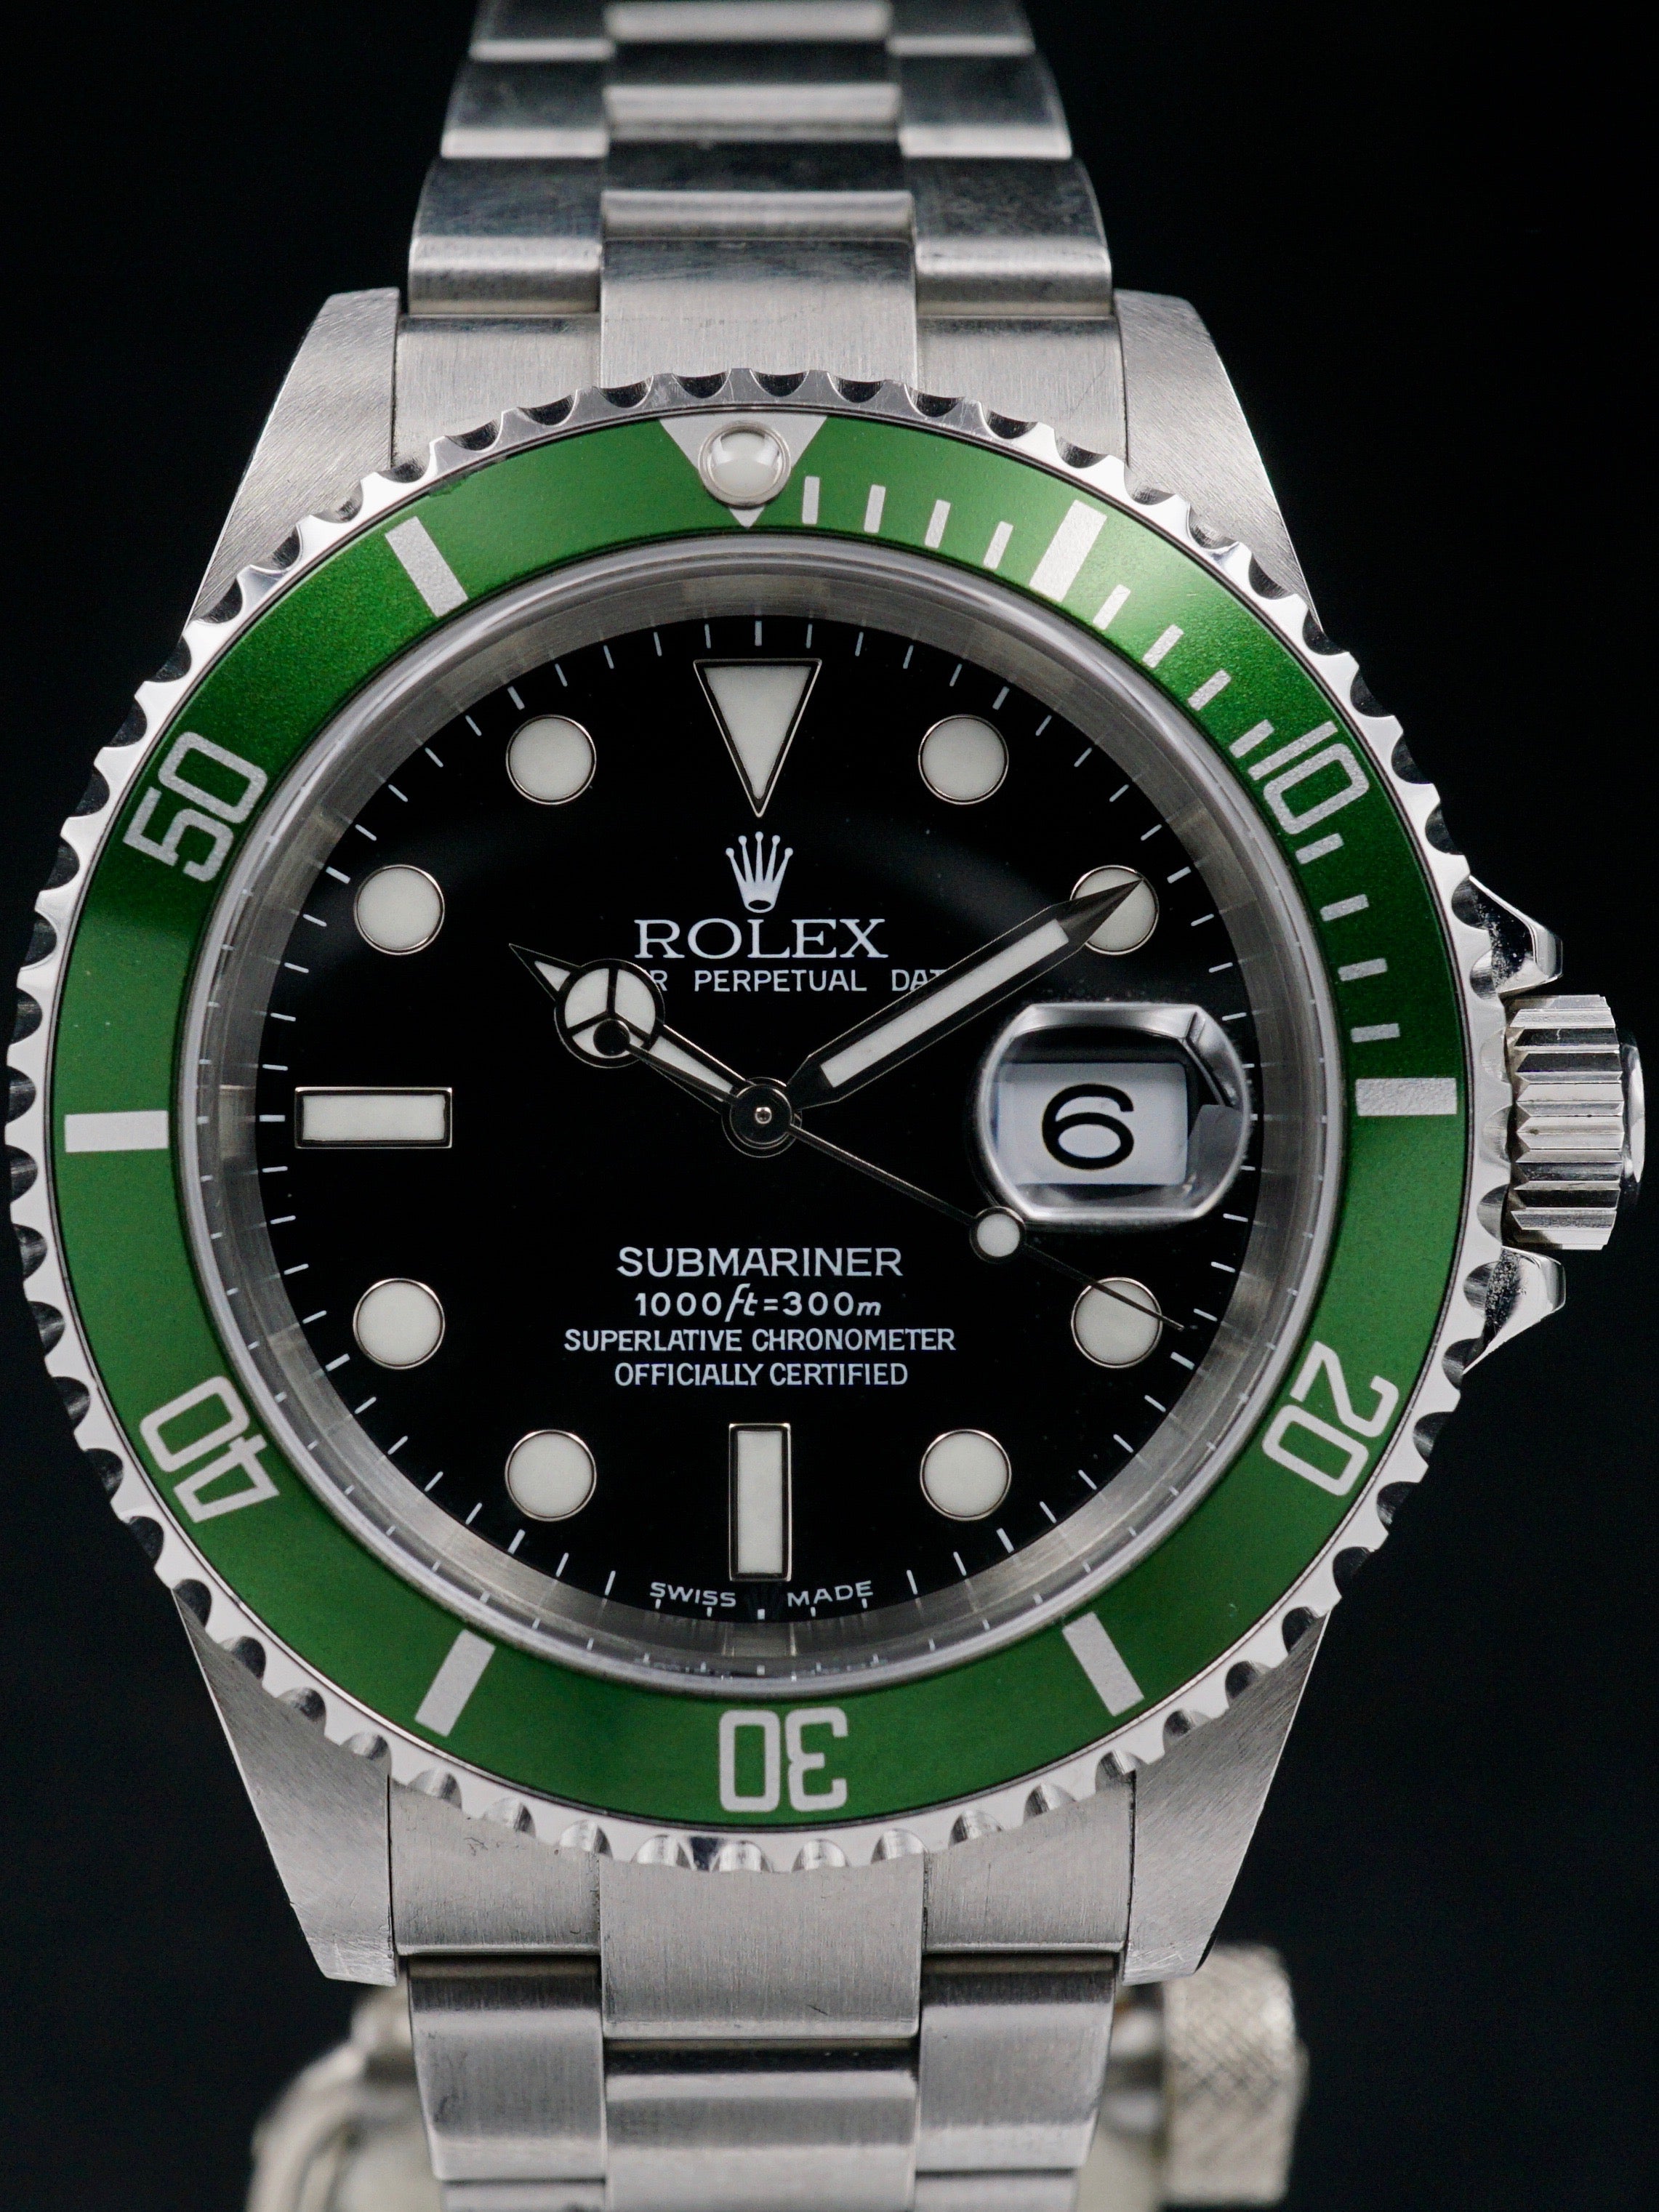 2003 Rolex Green Submariner (Ref. 16610LV) Mk.1 "Flat 4" W/ Box and Papers